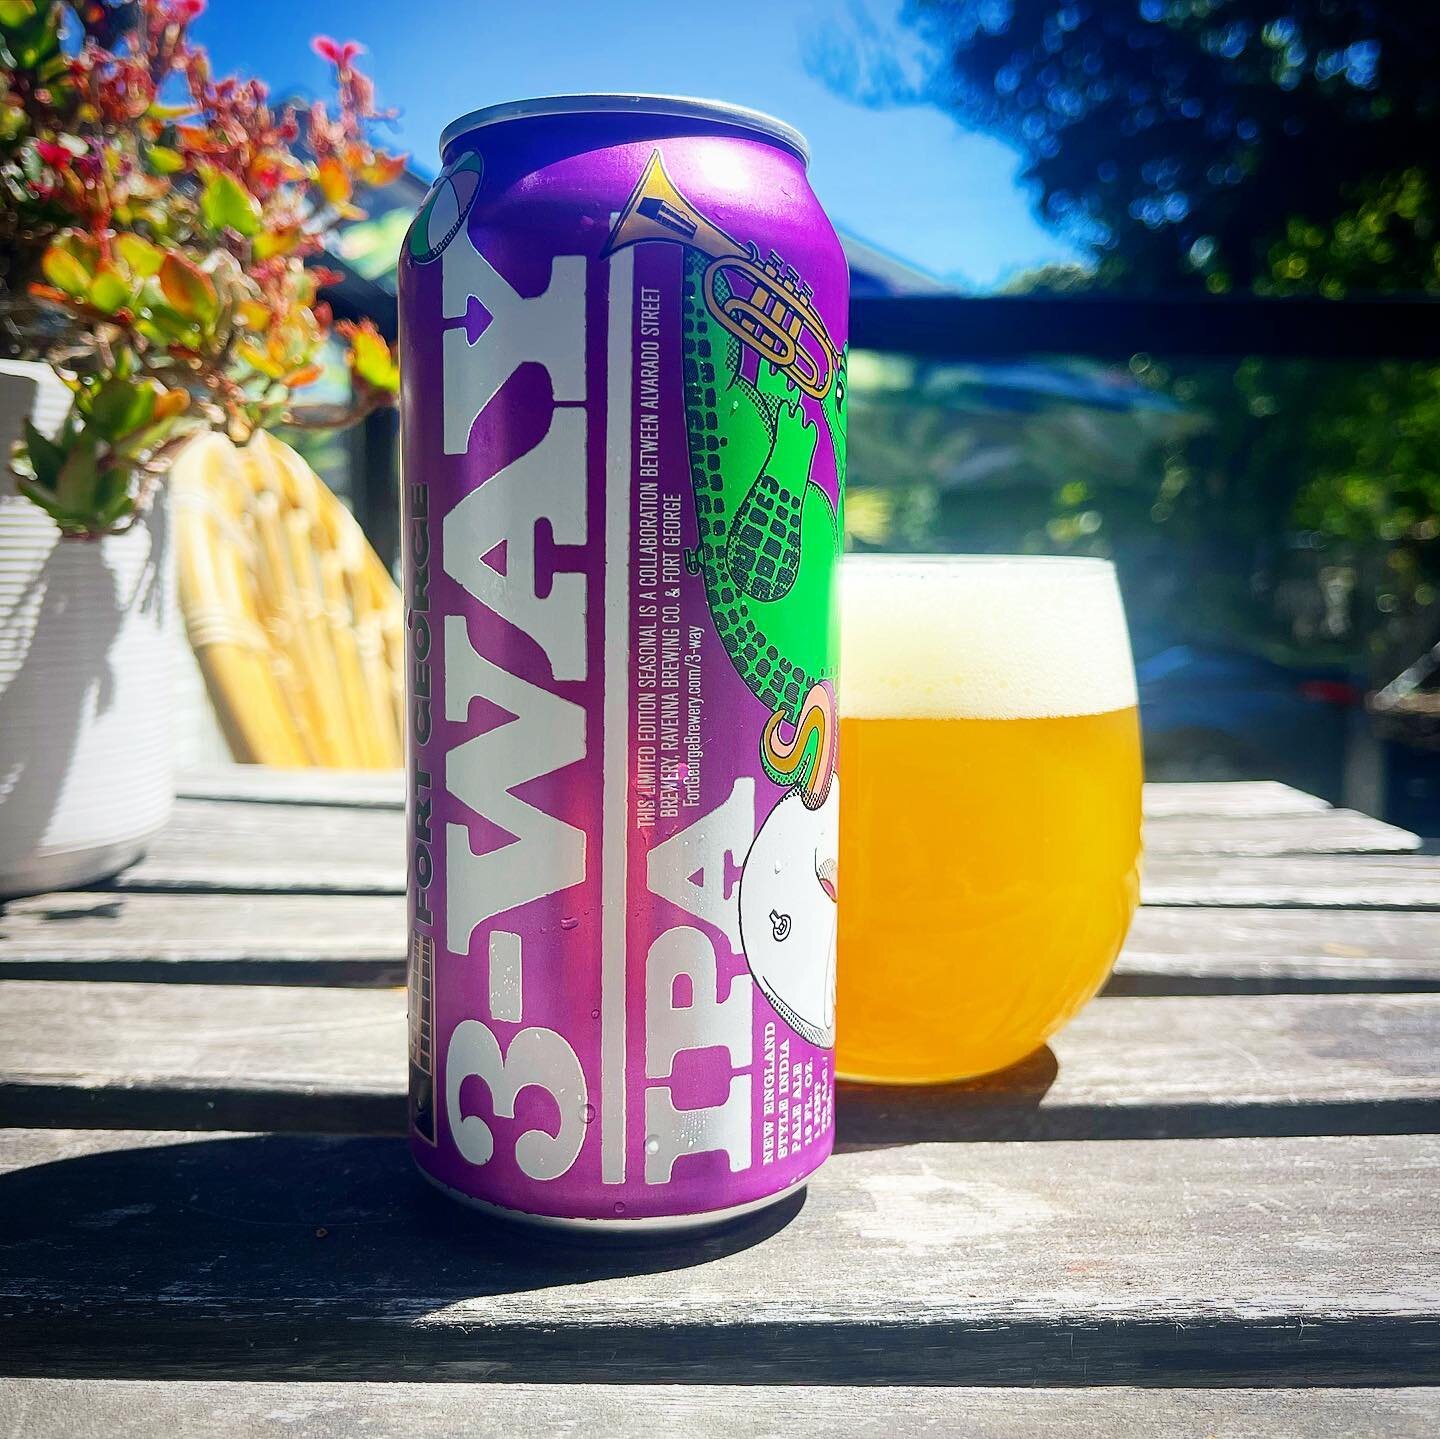 It&rsquo;s a gonna be a beautiful week here in the bay! Join us to celebrate the release of this beautiful collaboration between @fortgeorgebeer @alvaradostreetbrewery &amp; @ravennabrewing - 3way NE style IPA! 
.
Monday 4pm @therakepub 
.
Tuesday 6p